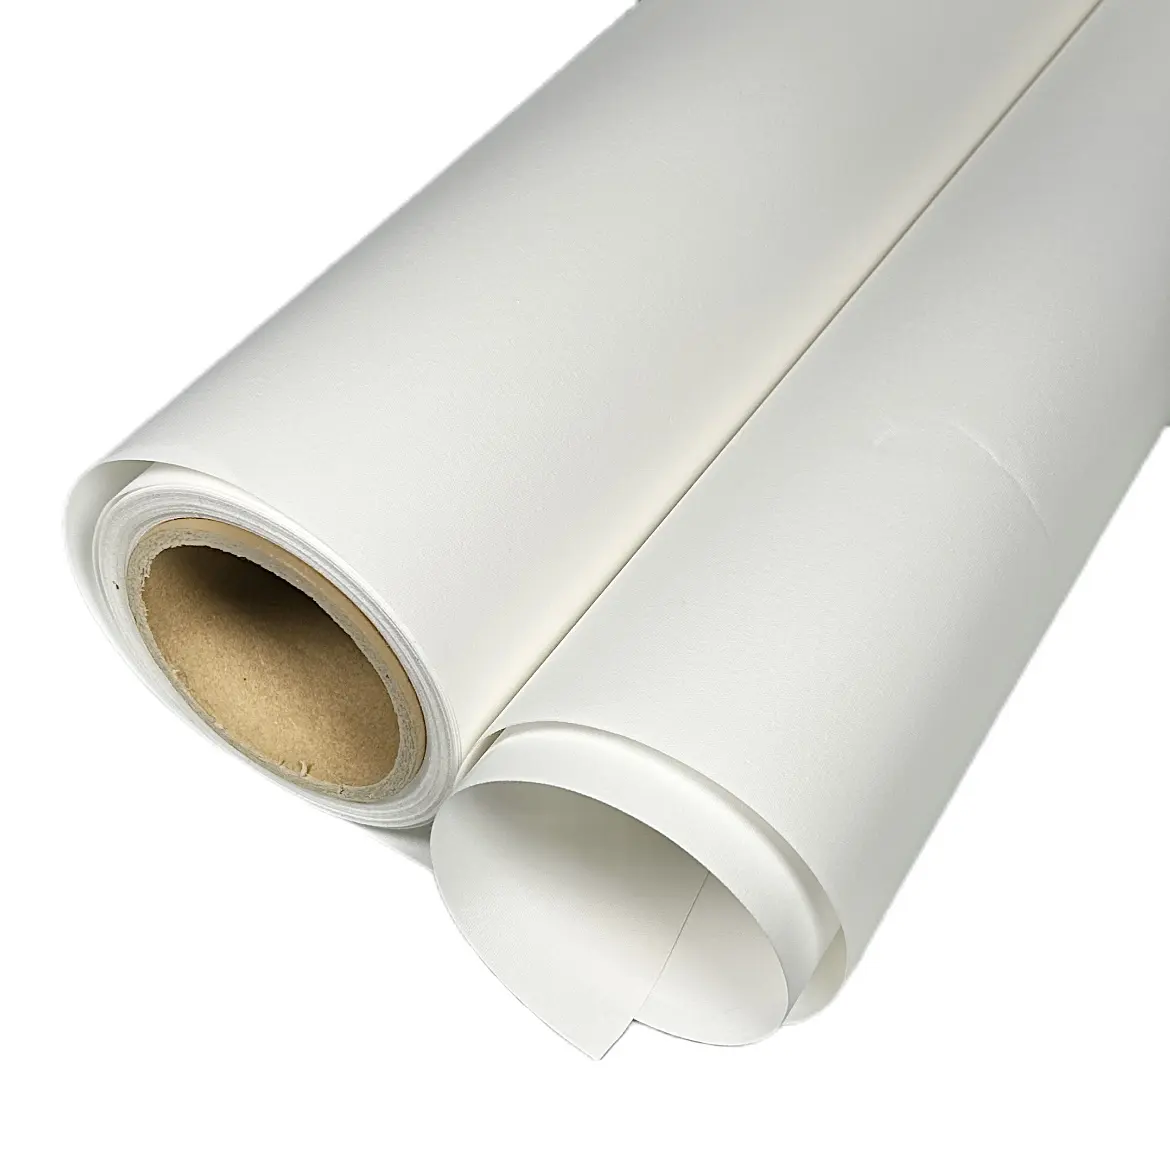 300D*300D Polyester Canvas Rolls Rollup Stand Banner White Blank Rolls White Backing Printing Material Inkjet Print Canvas